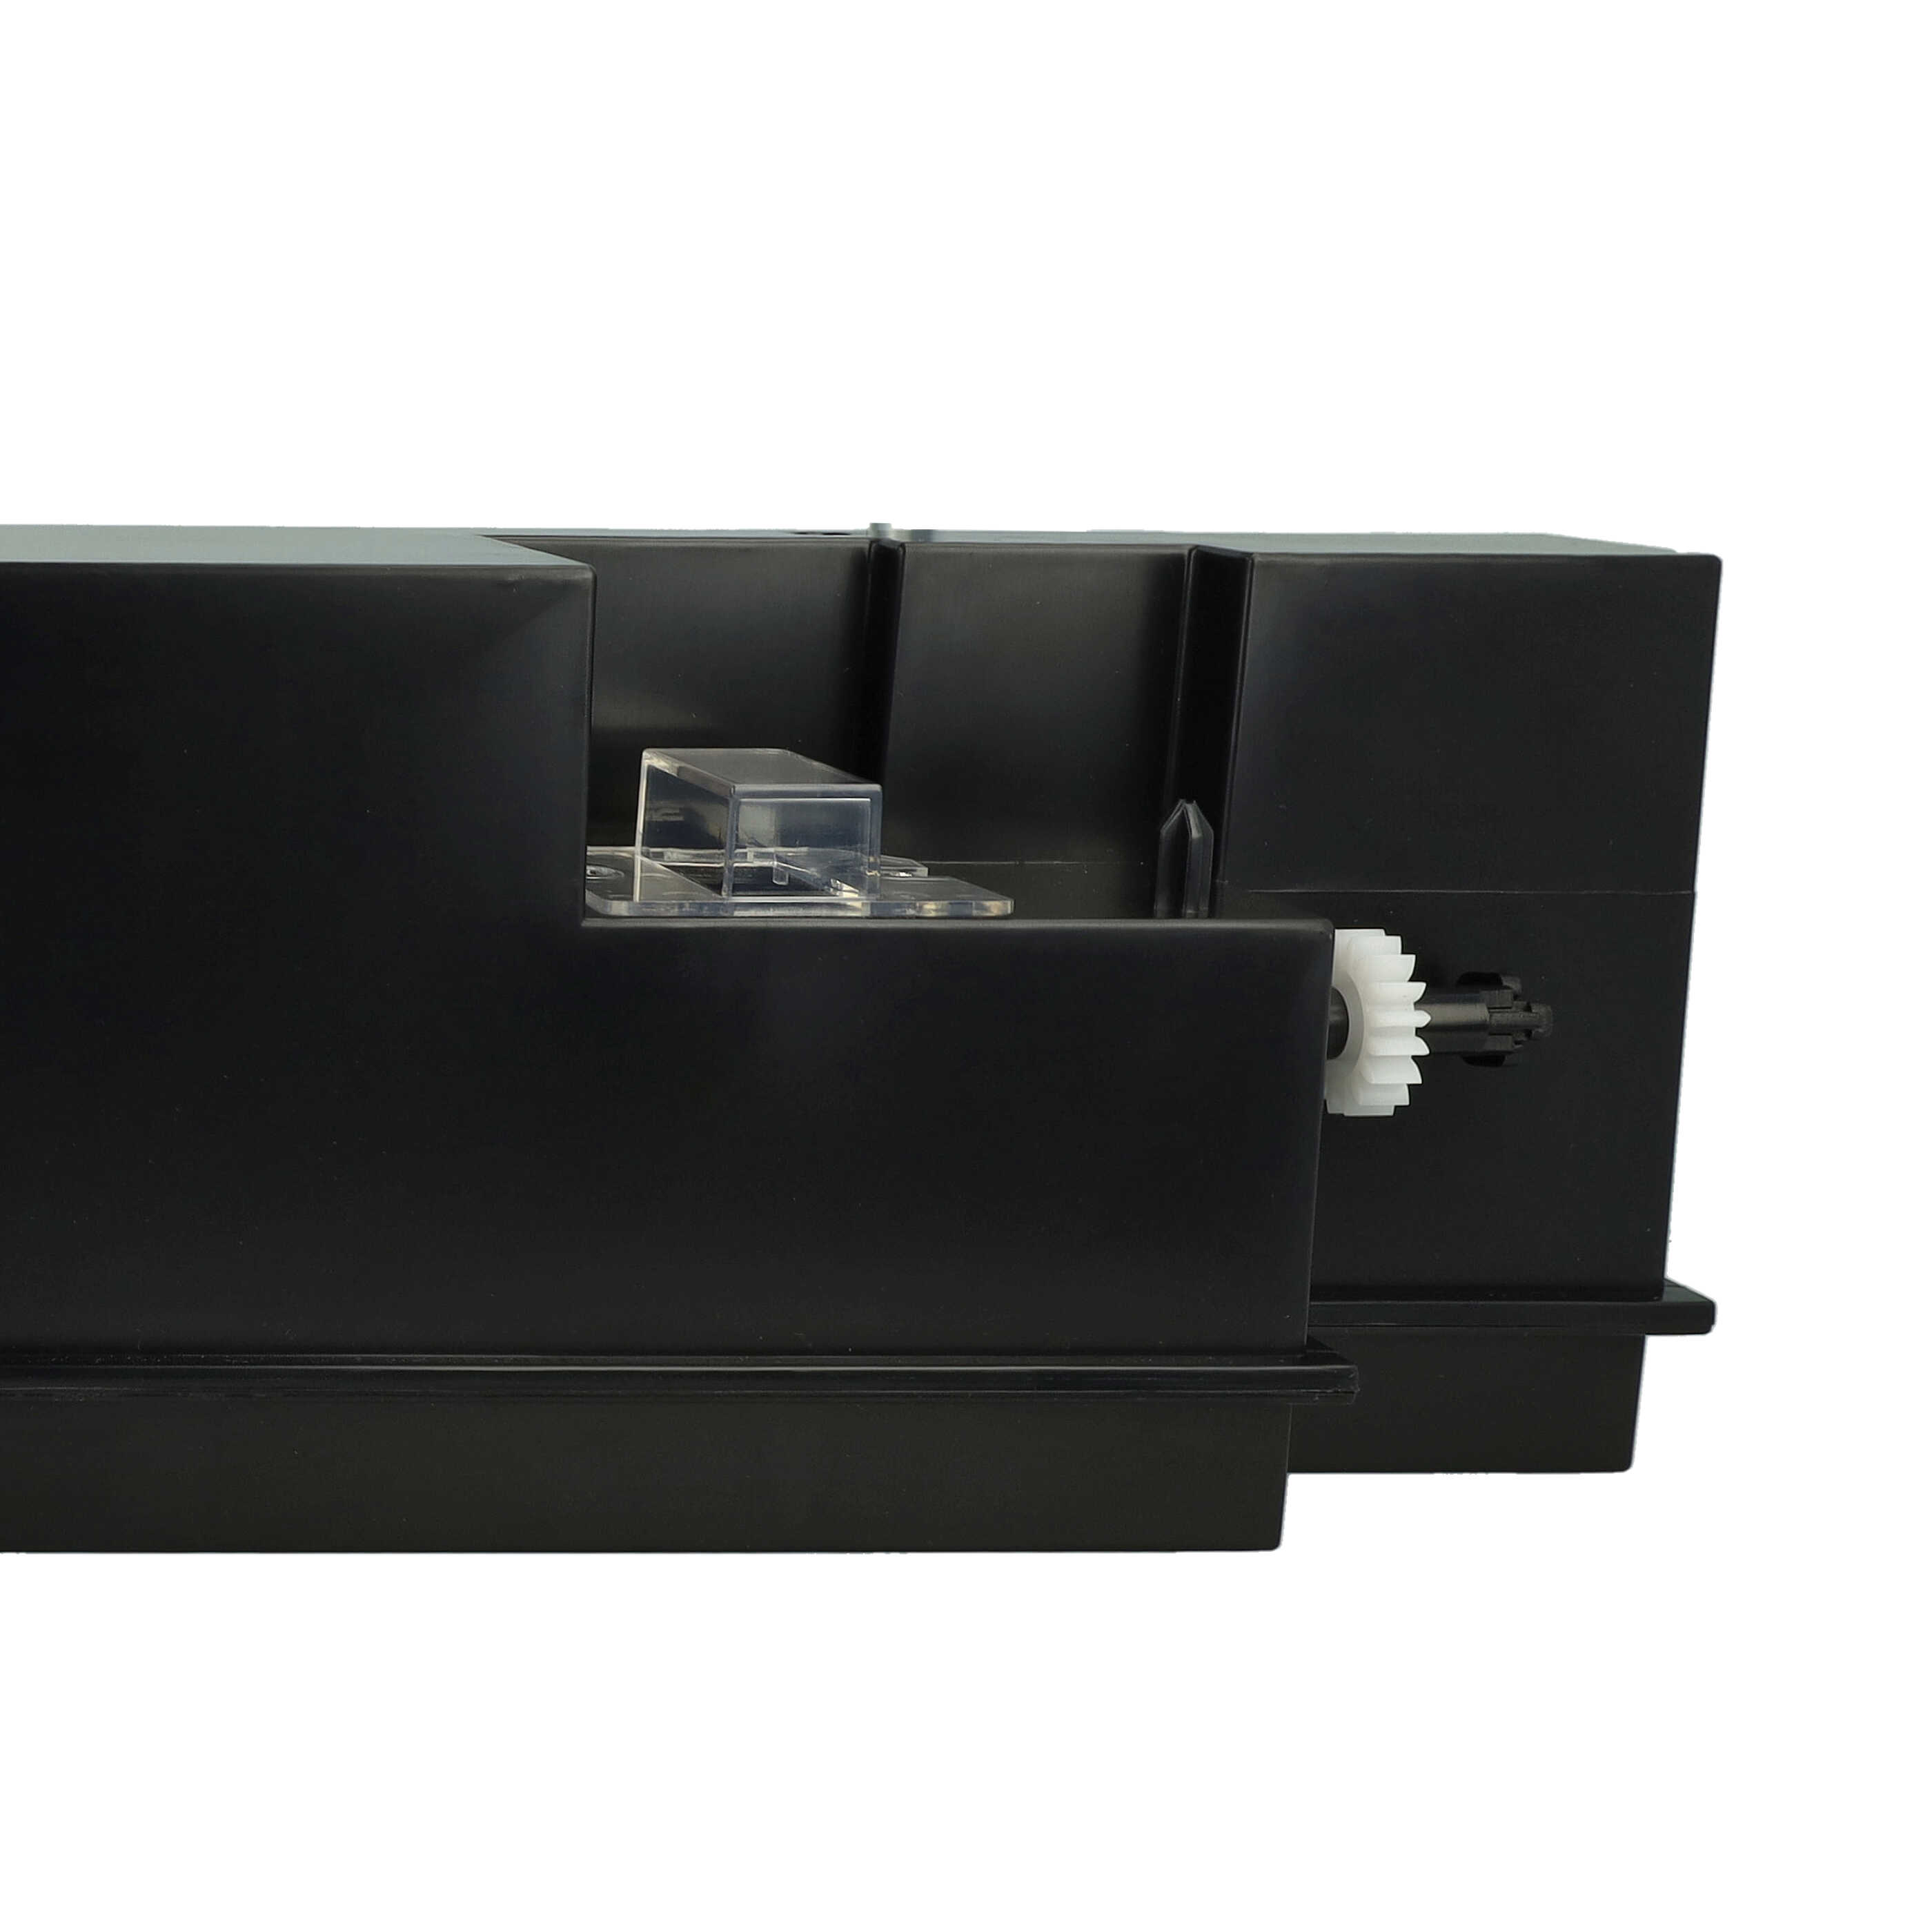 Waste Toner Container as Replacement for Konica Minolta A0XPWY2, 1008661, A0XPWY5, A0XPWY4, A2WYWY3 - Black